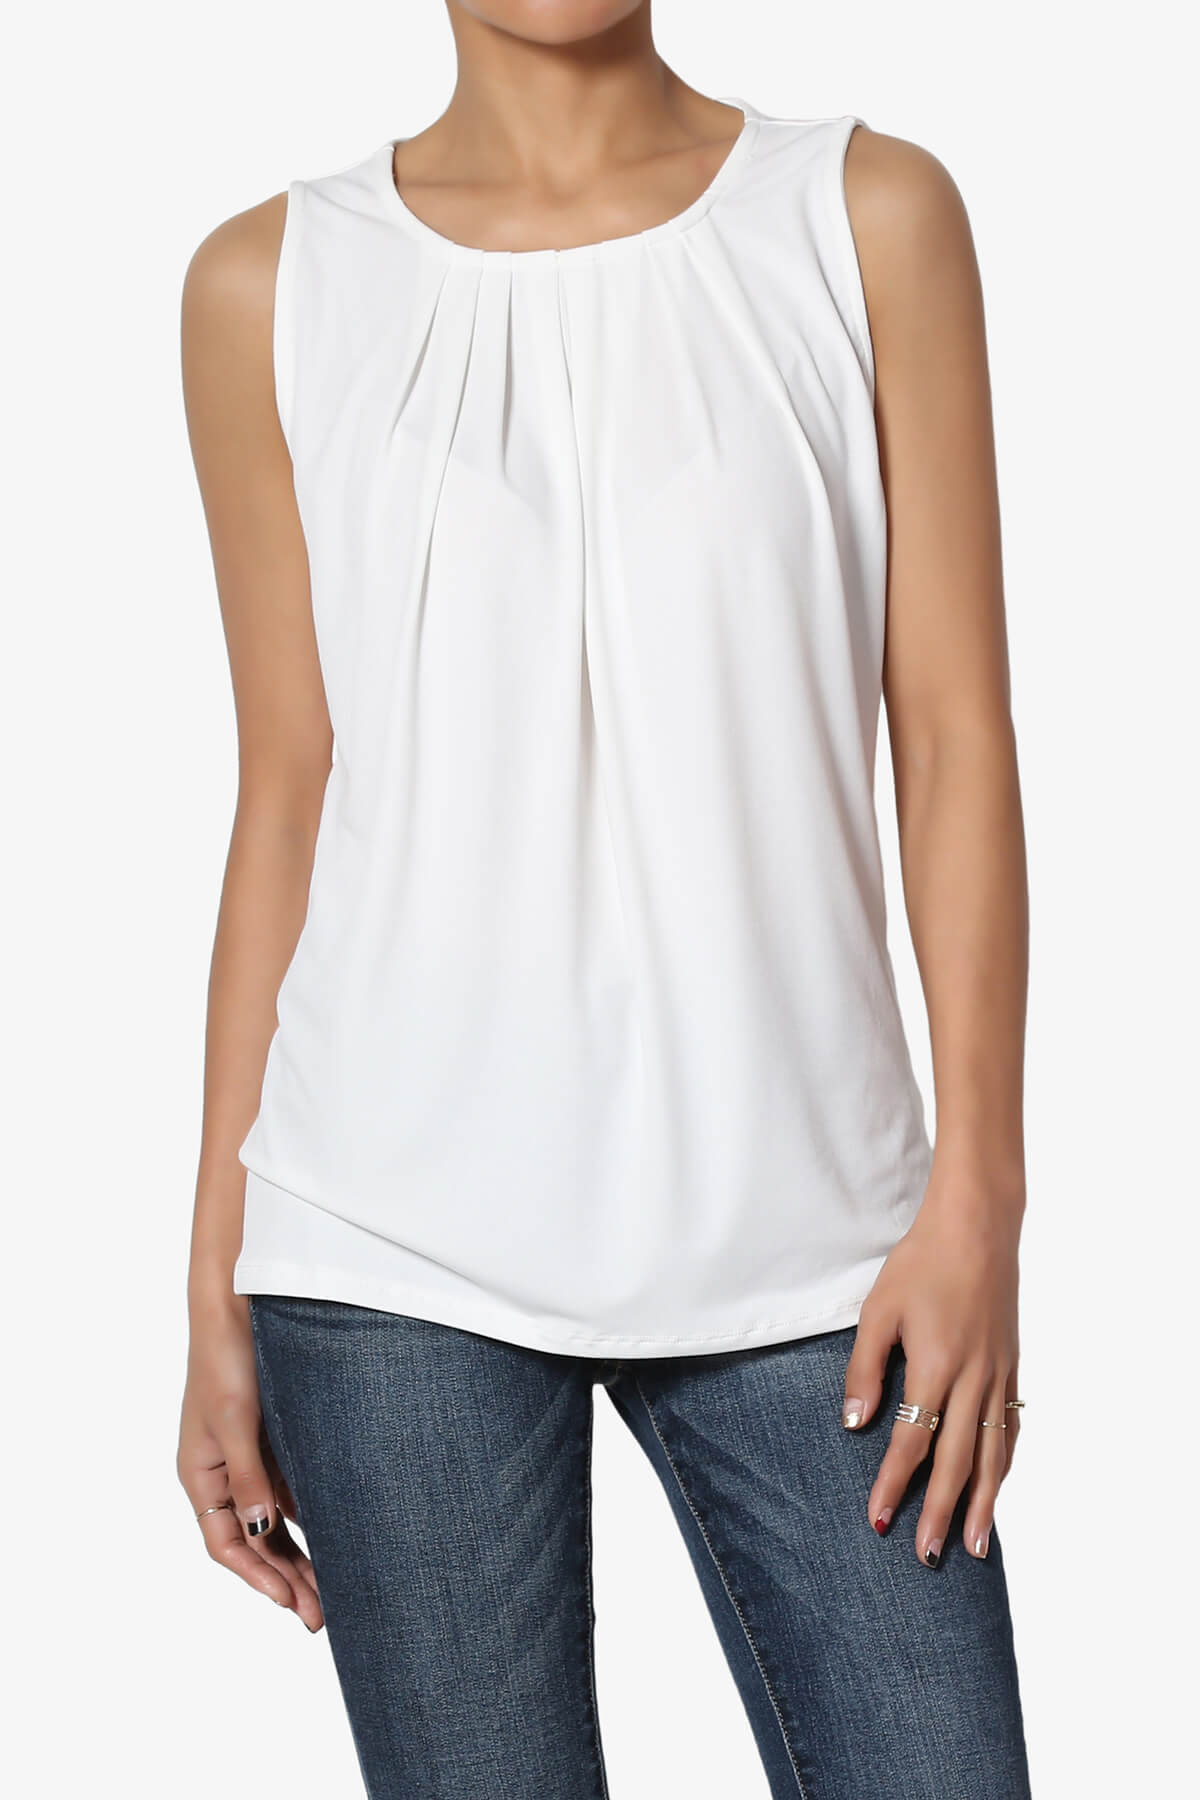 Load image into Gallery viewer, Chaffee Pleat Neck Tank Top IVORY_1
